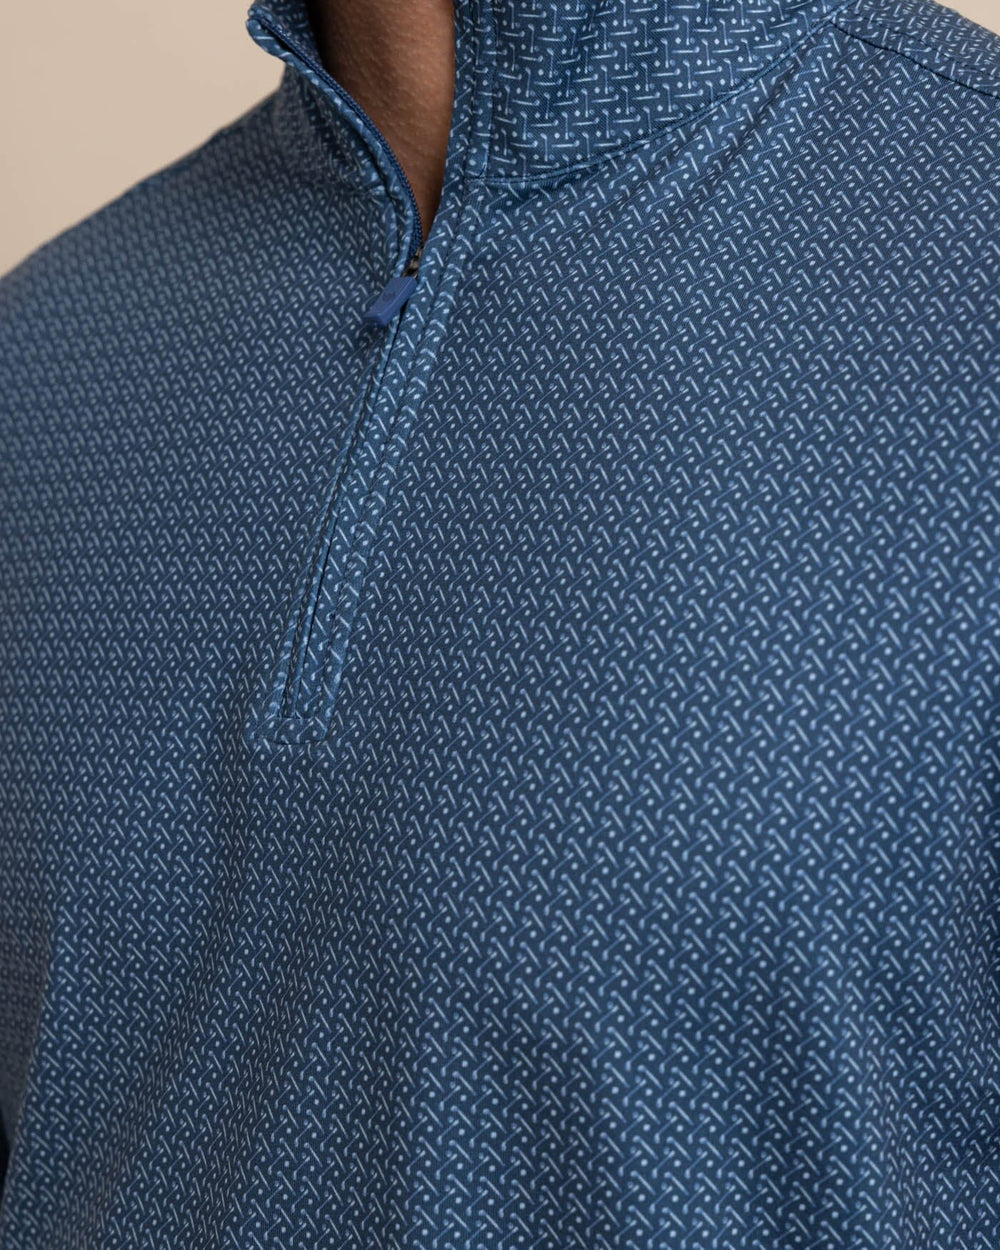 The detail view of the Southern Tide Clubbin It Print Cruiser Quarter Zip by Southern Tide - Aged Denim